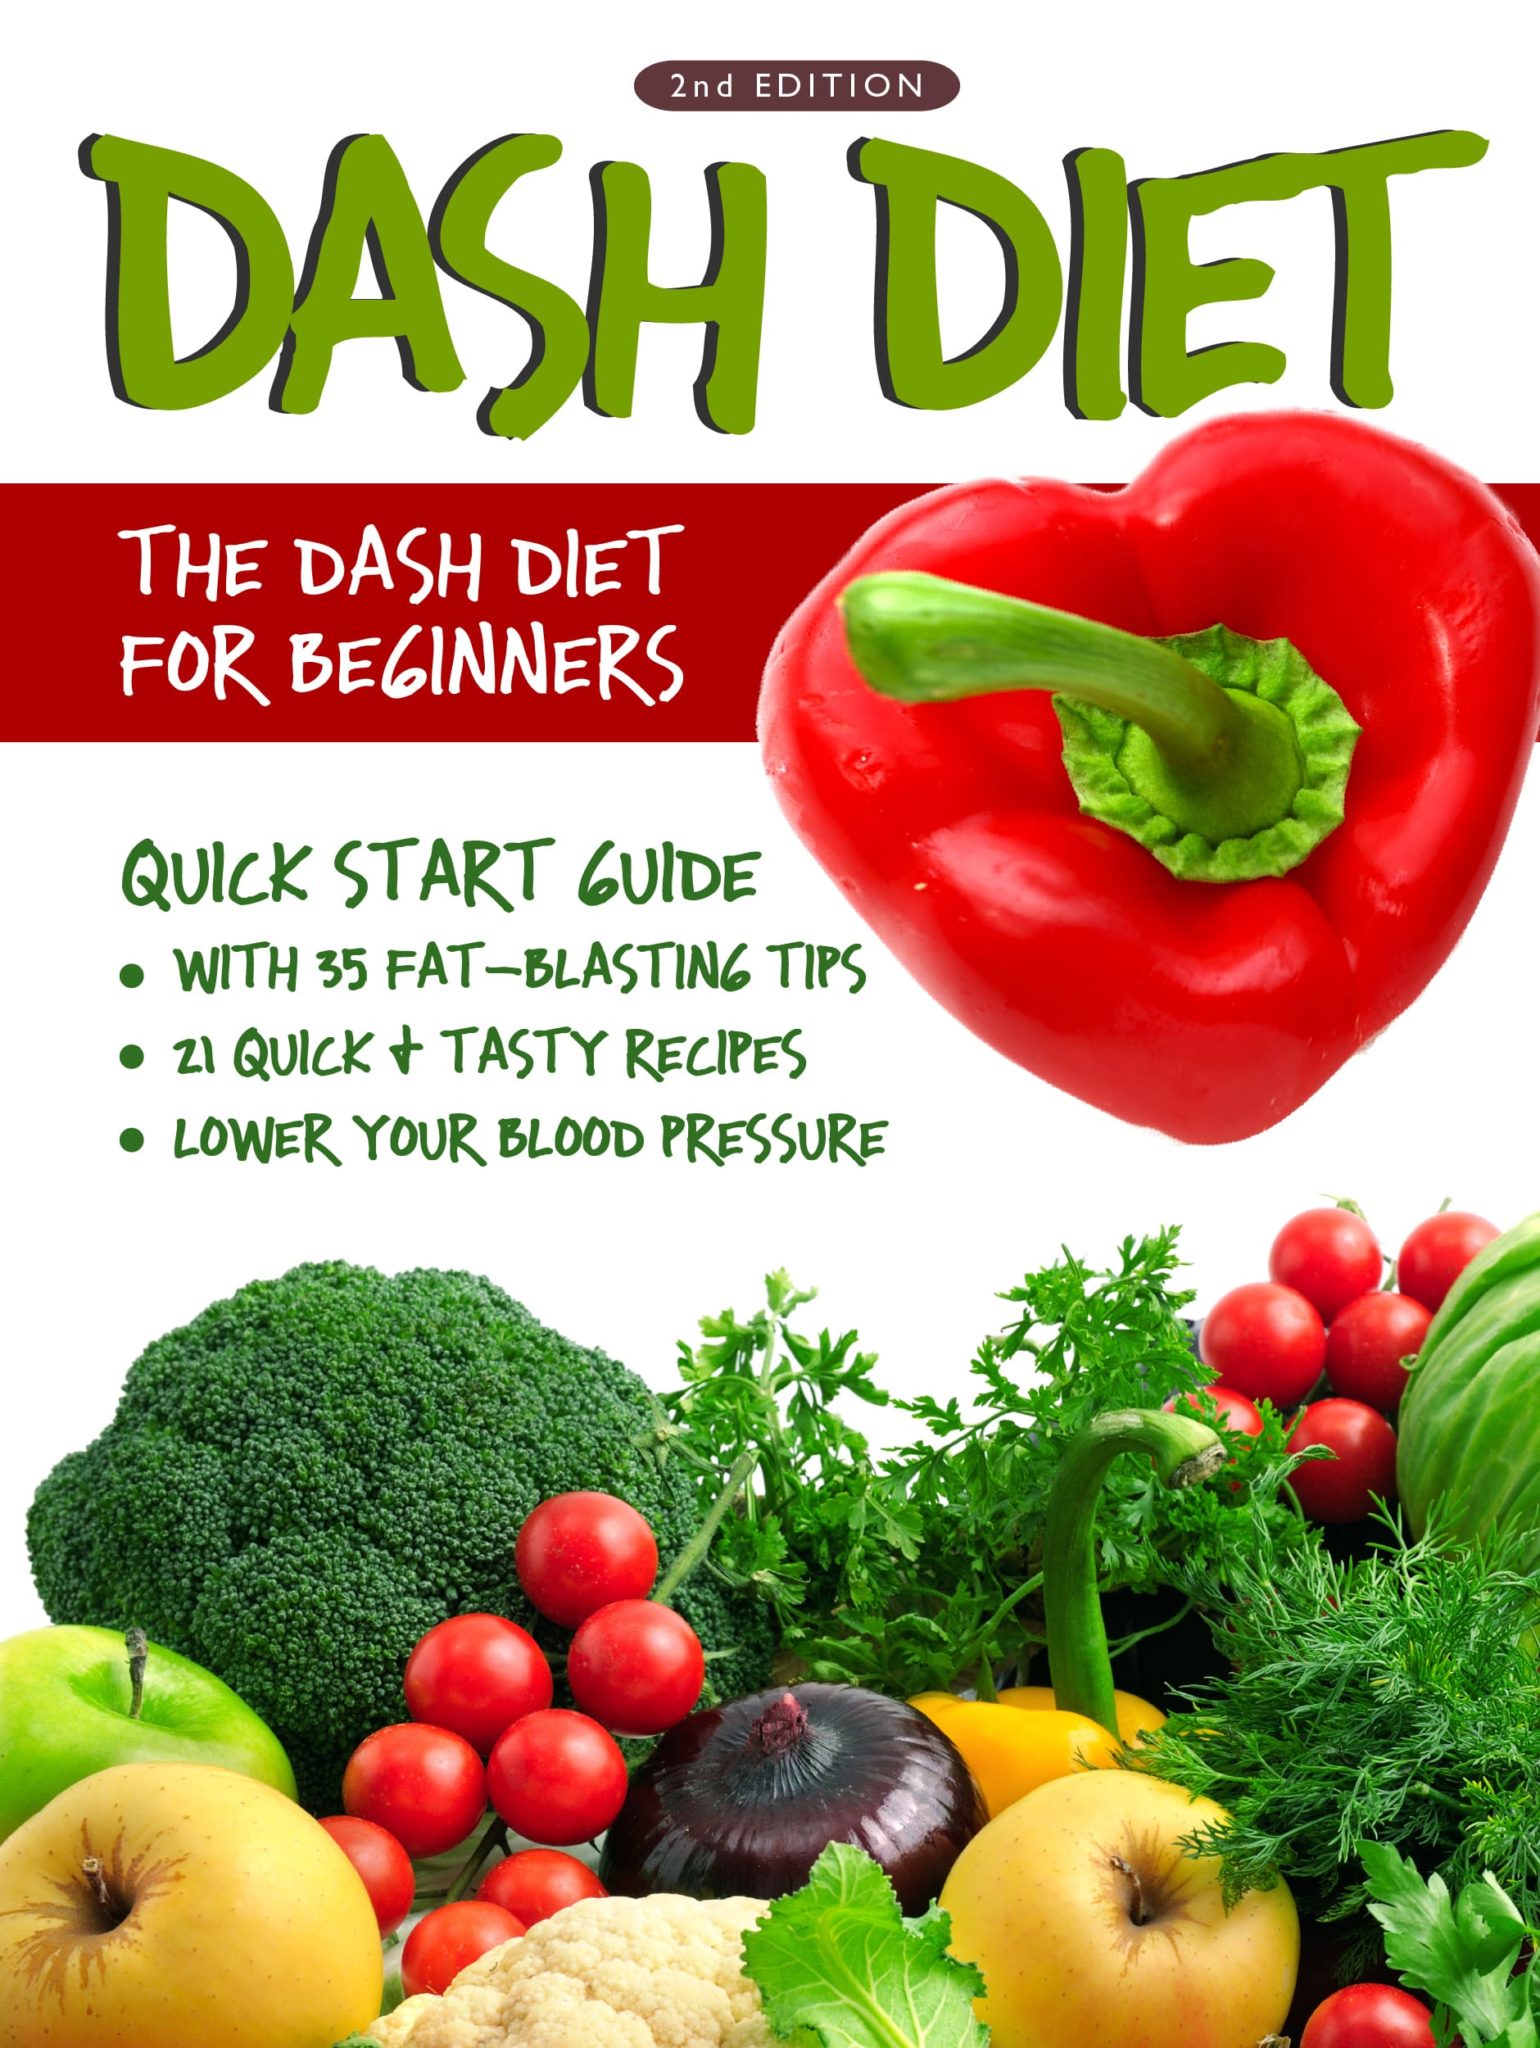 FREE: DASH Diet (2nd Edition): The DASH Diet for Beginners – DASH Diet Quick Start Guide with 35 FAT-BLASTING Tips + 21 Quick & Tasty Recipes That Will Lower YOUR Blood Pressure! by Linda Westwood